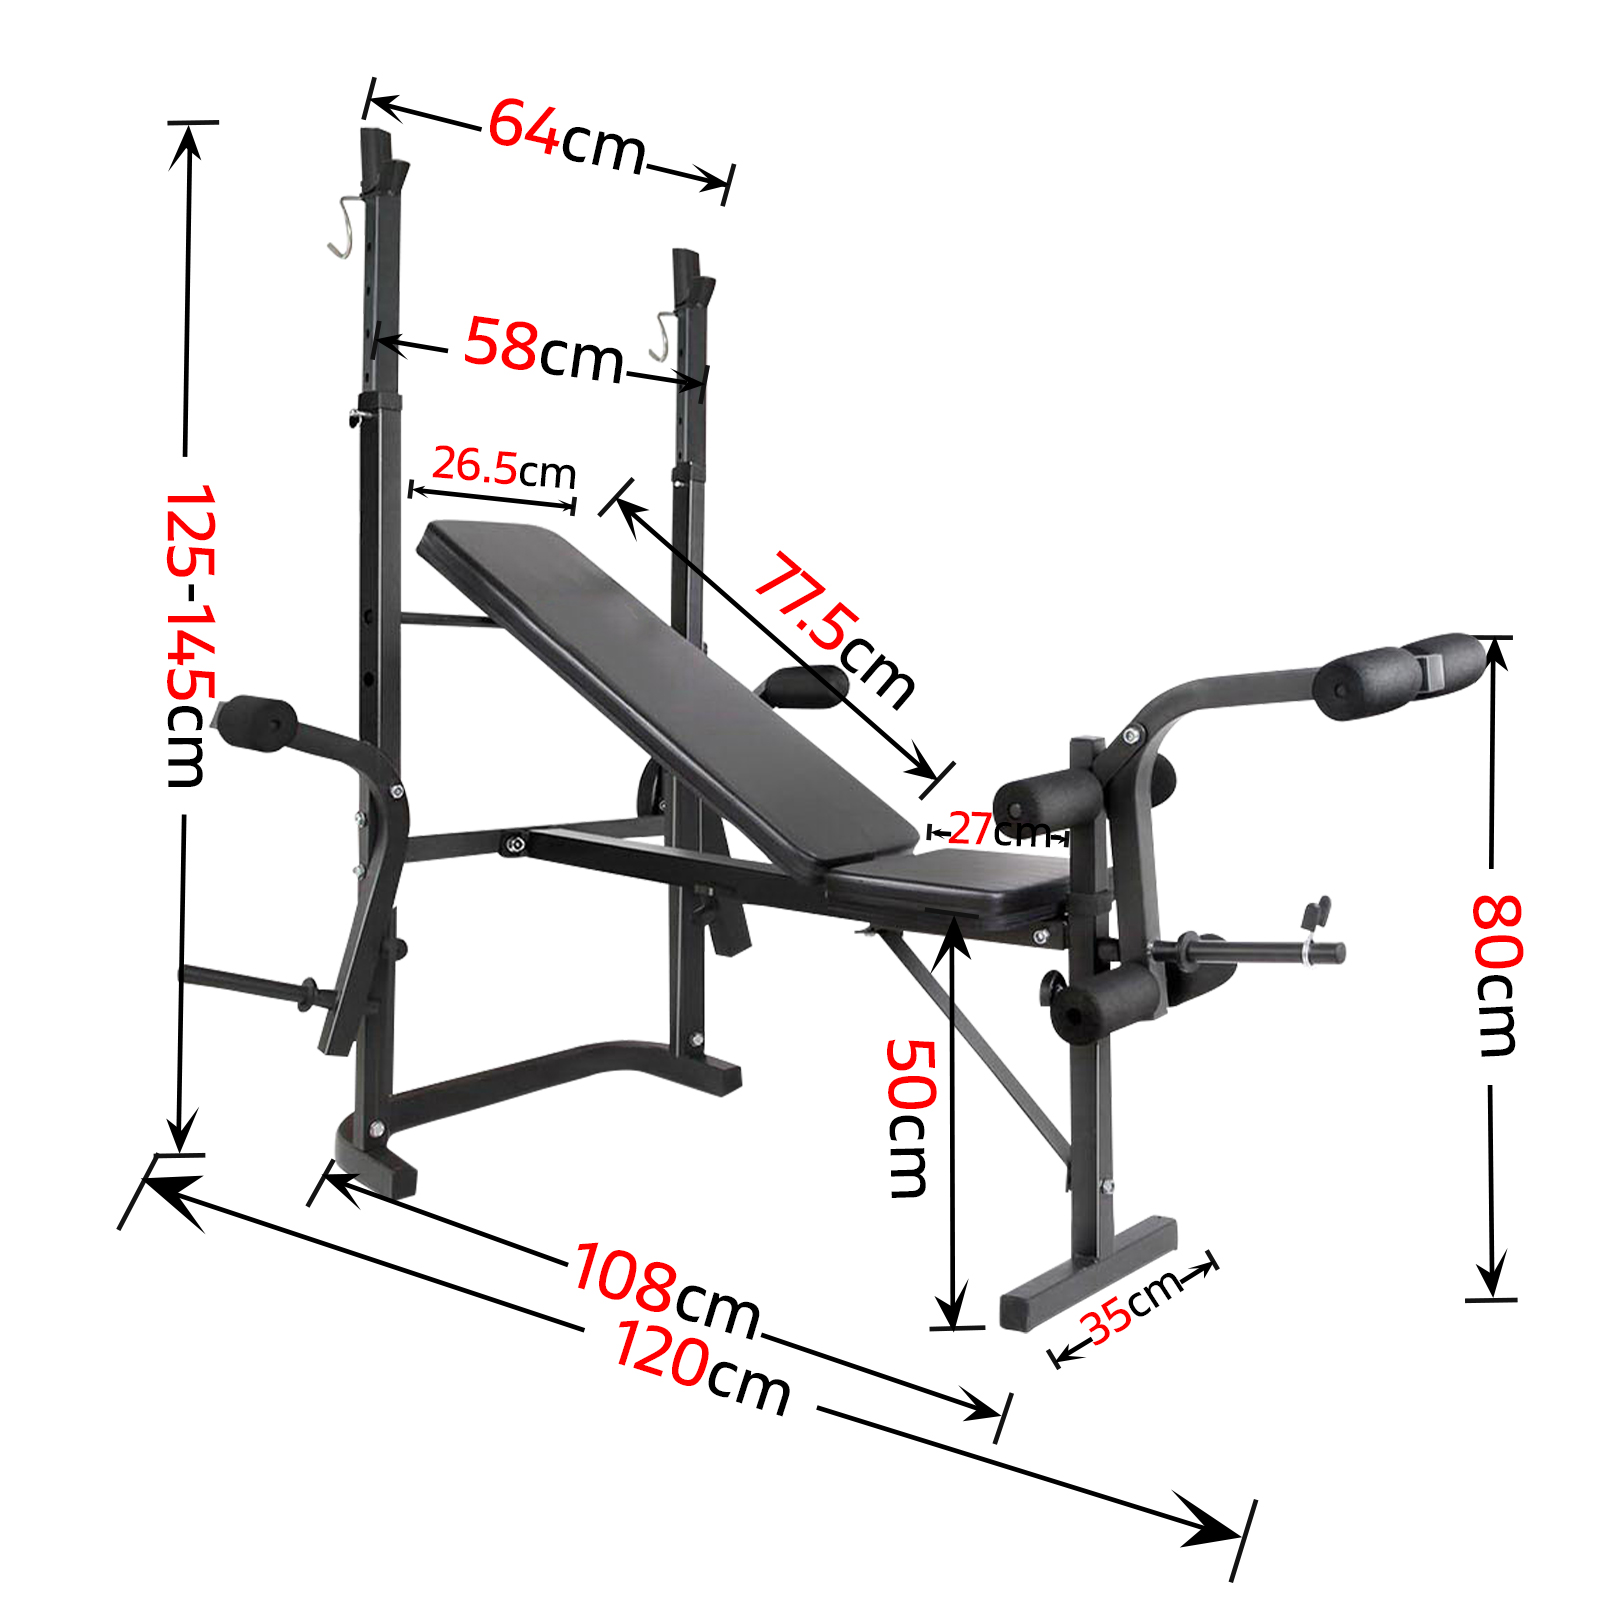 7-In-1 Weight Bench Multi-Function Power Station Fitness Gym Exercise Equipment 